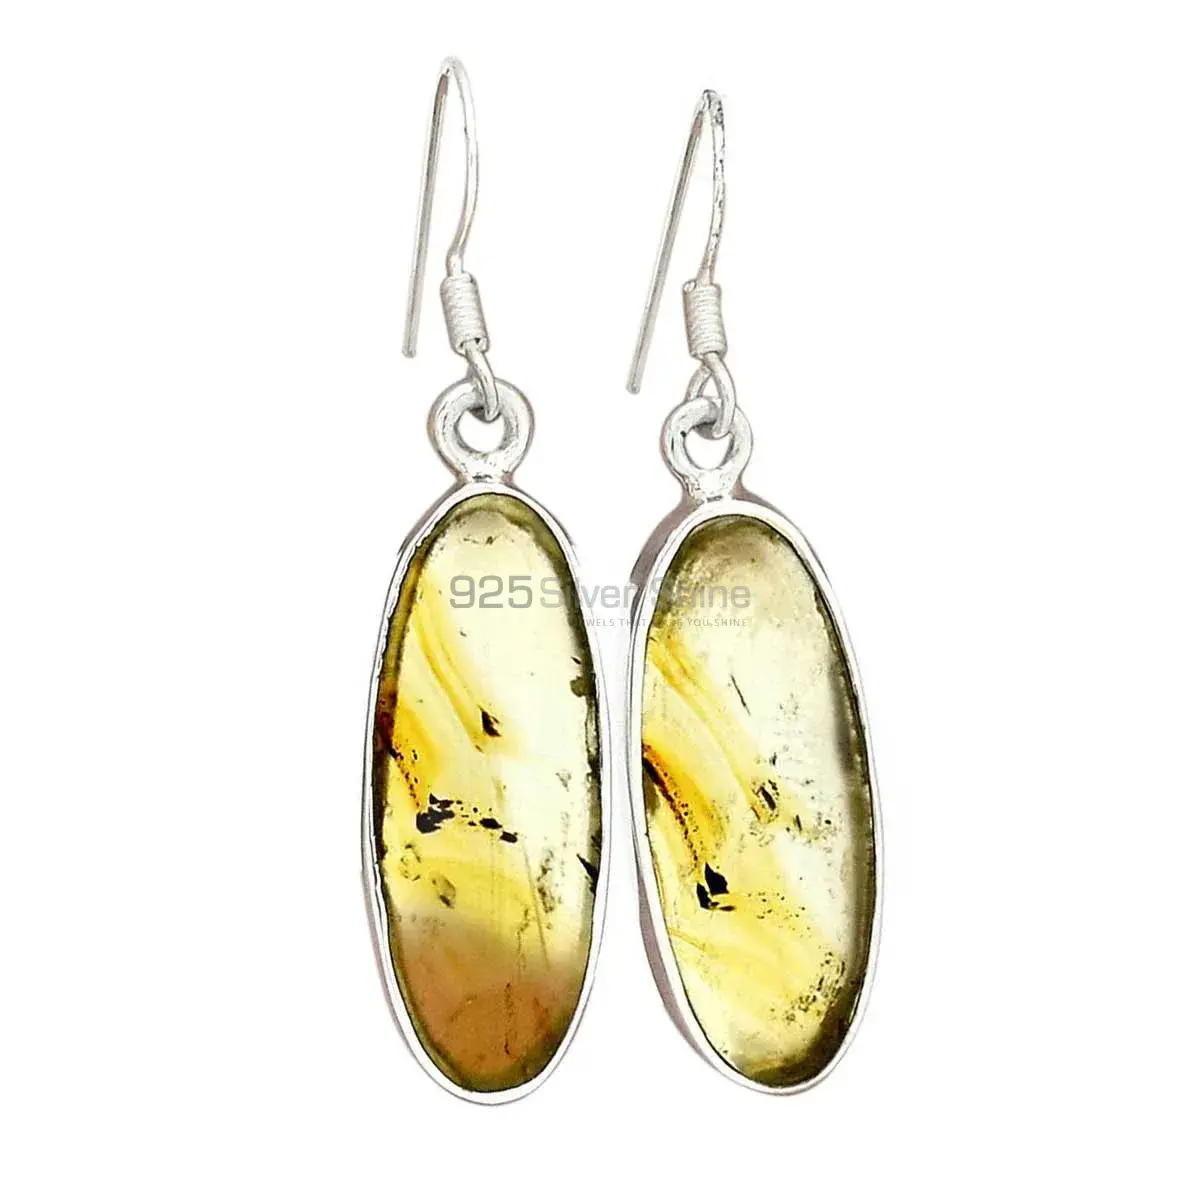 Inexpensive 925 Sterling Silver Handmade Earrings Manufacturer In Montana Agate Gemstone Jewelry 925SE2312_3